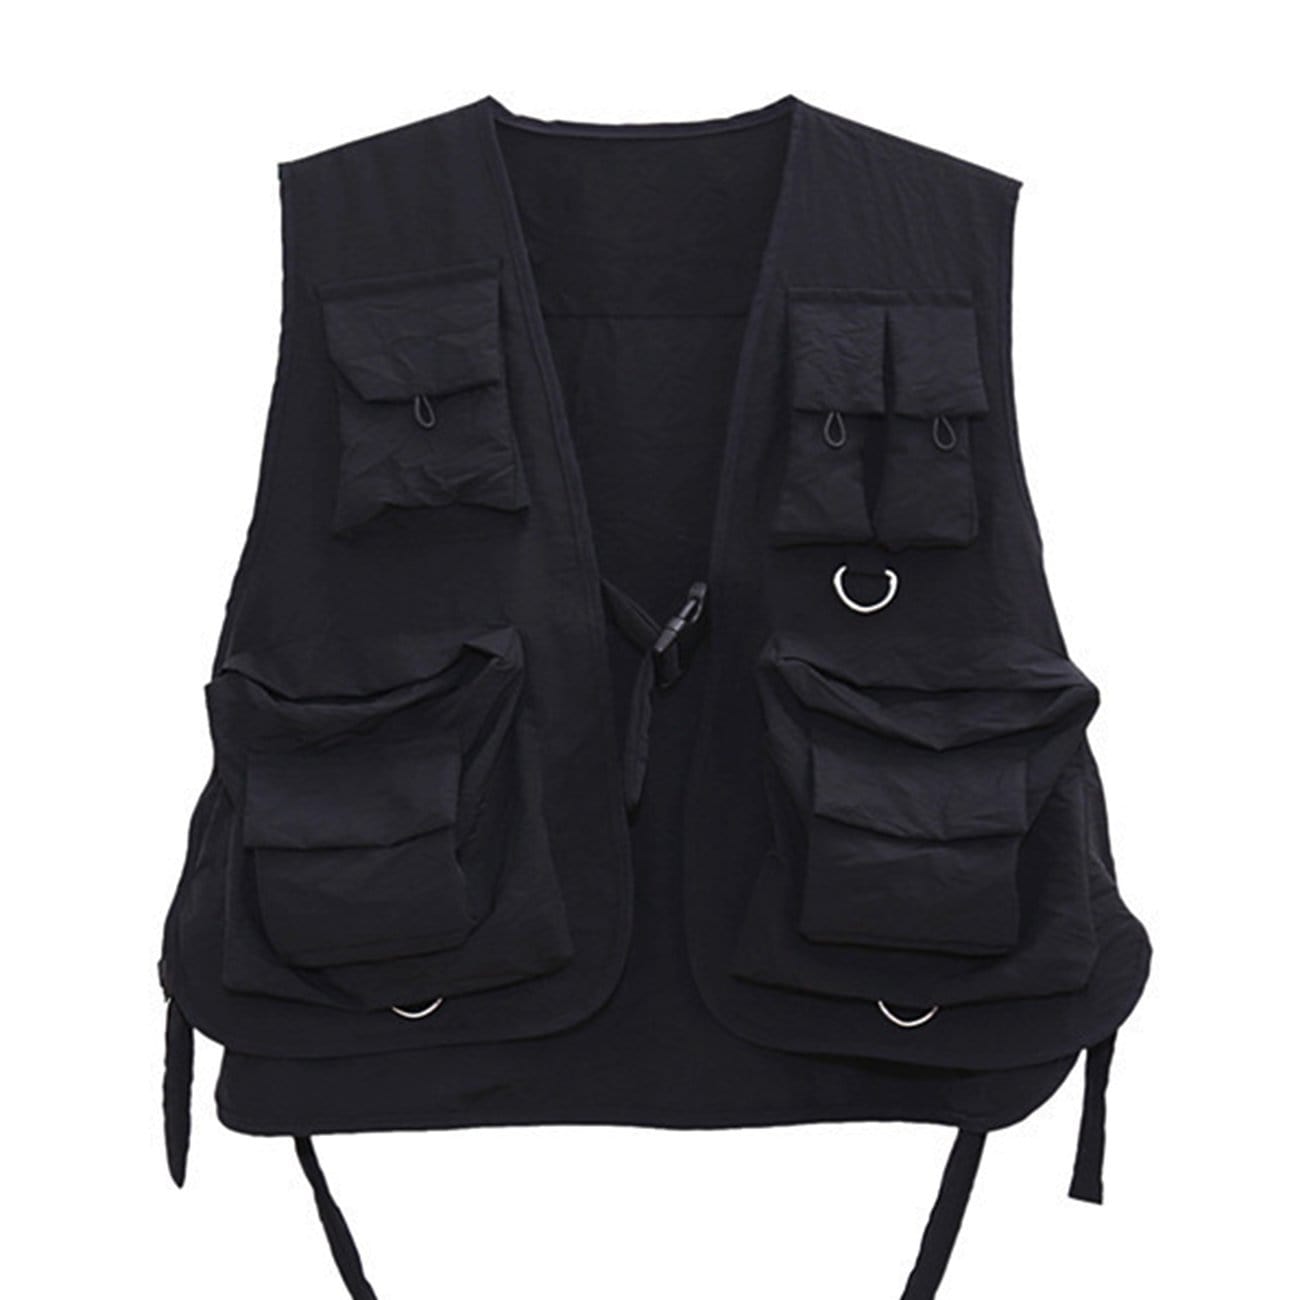 WLS Military Outdoor Tactical Vest